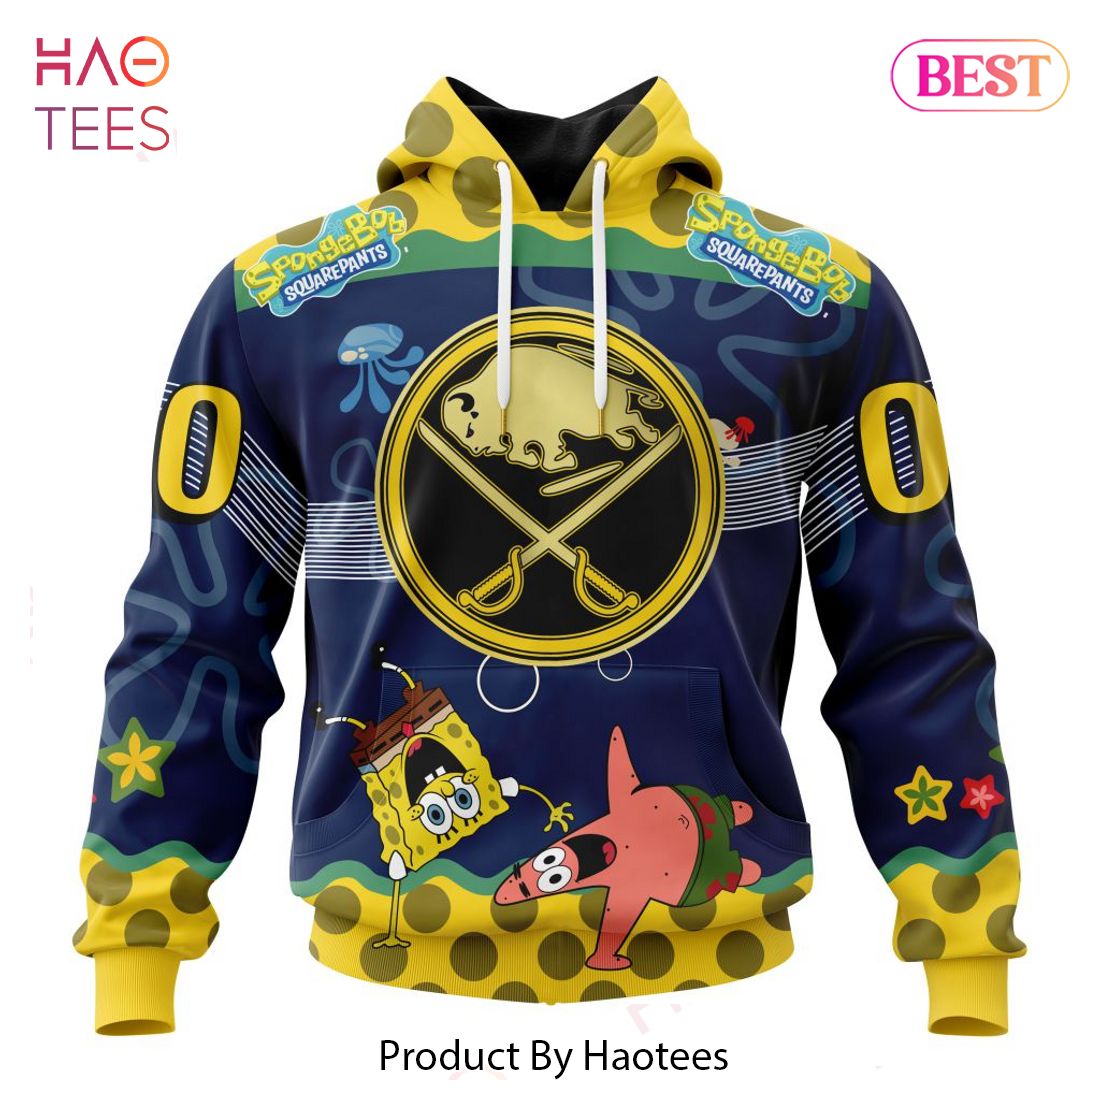 BEST NHL Buffalo Sabres Specialized Jersey With SpongeBob 3D Hoodie